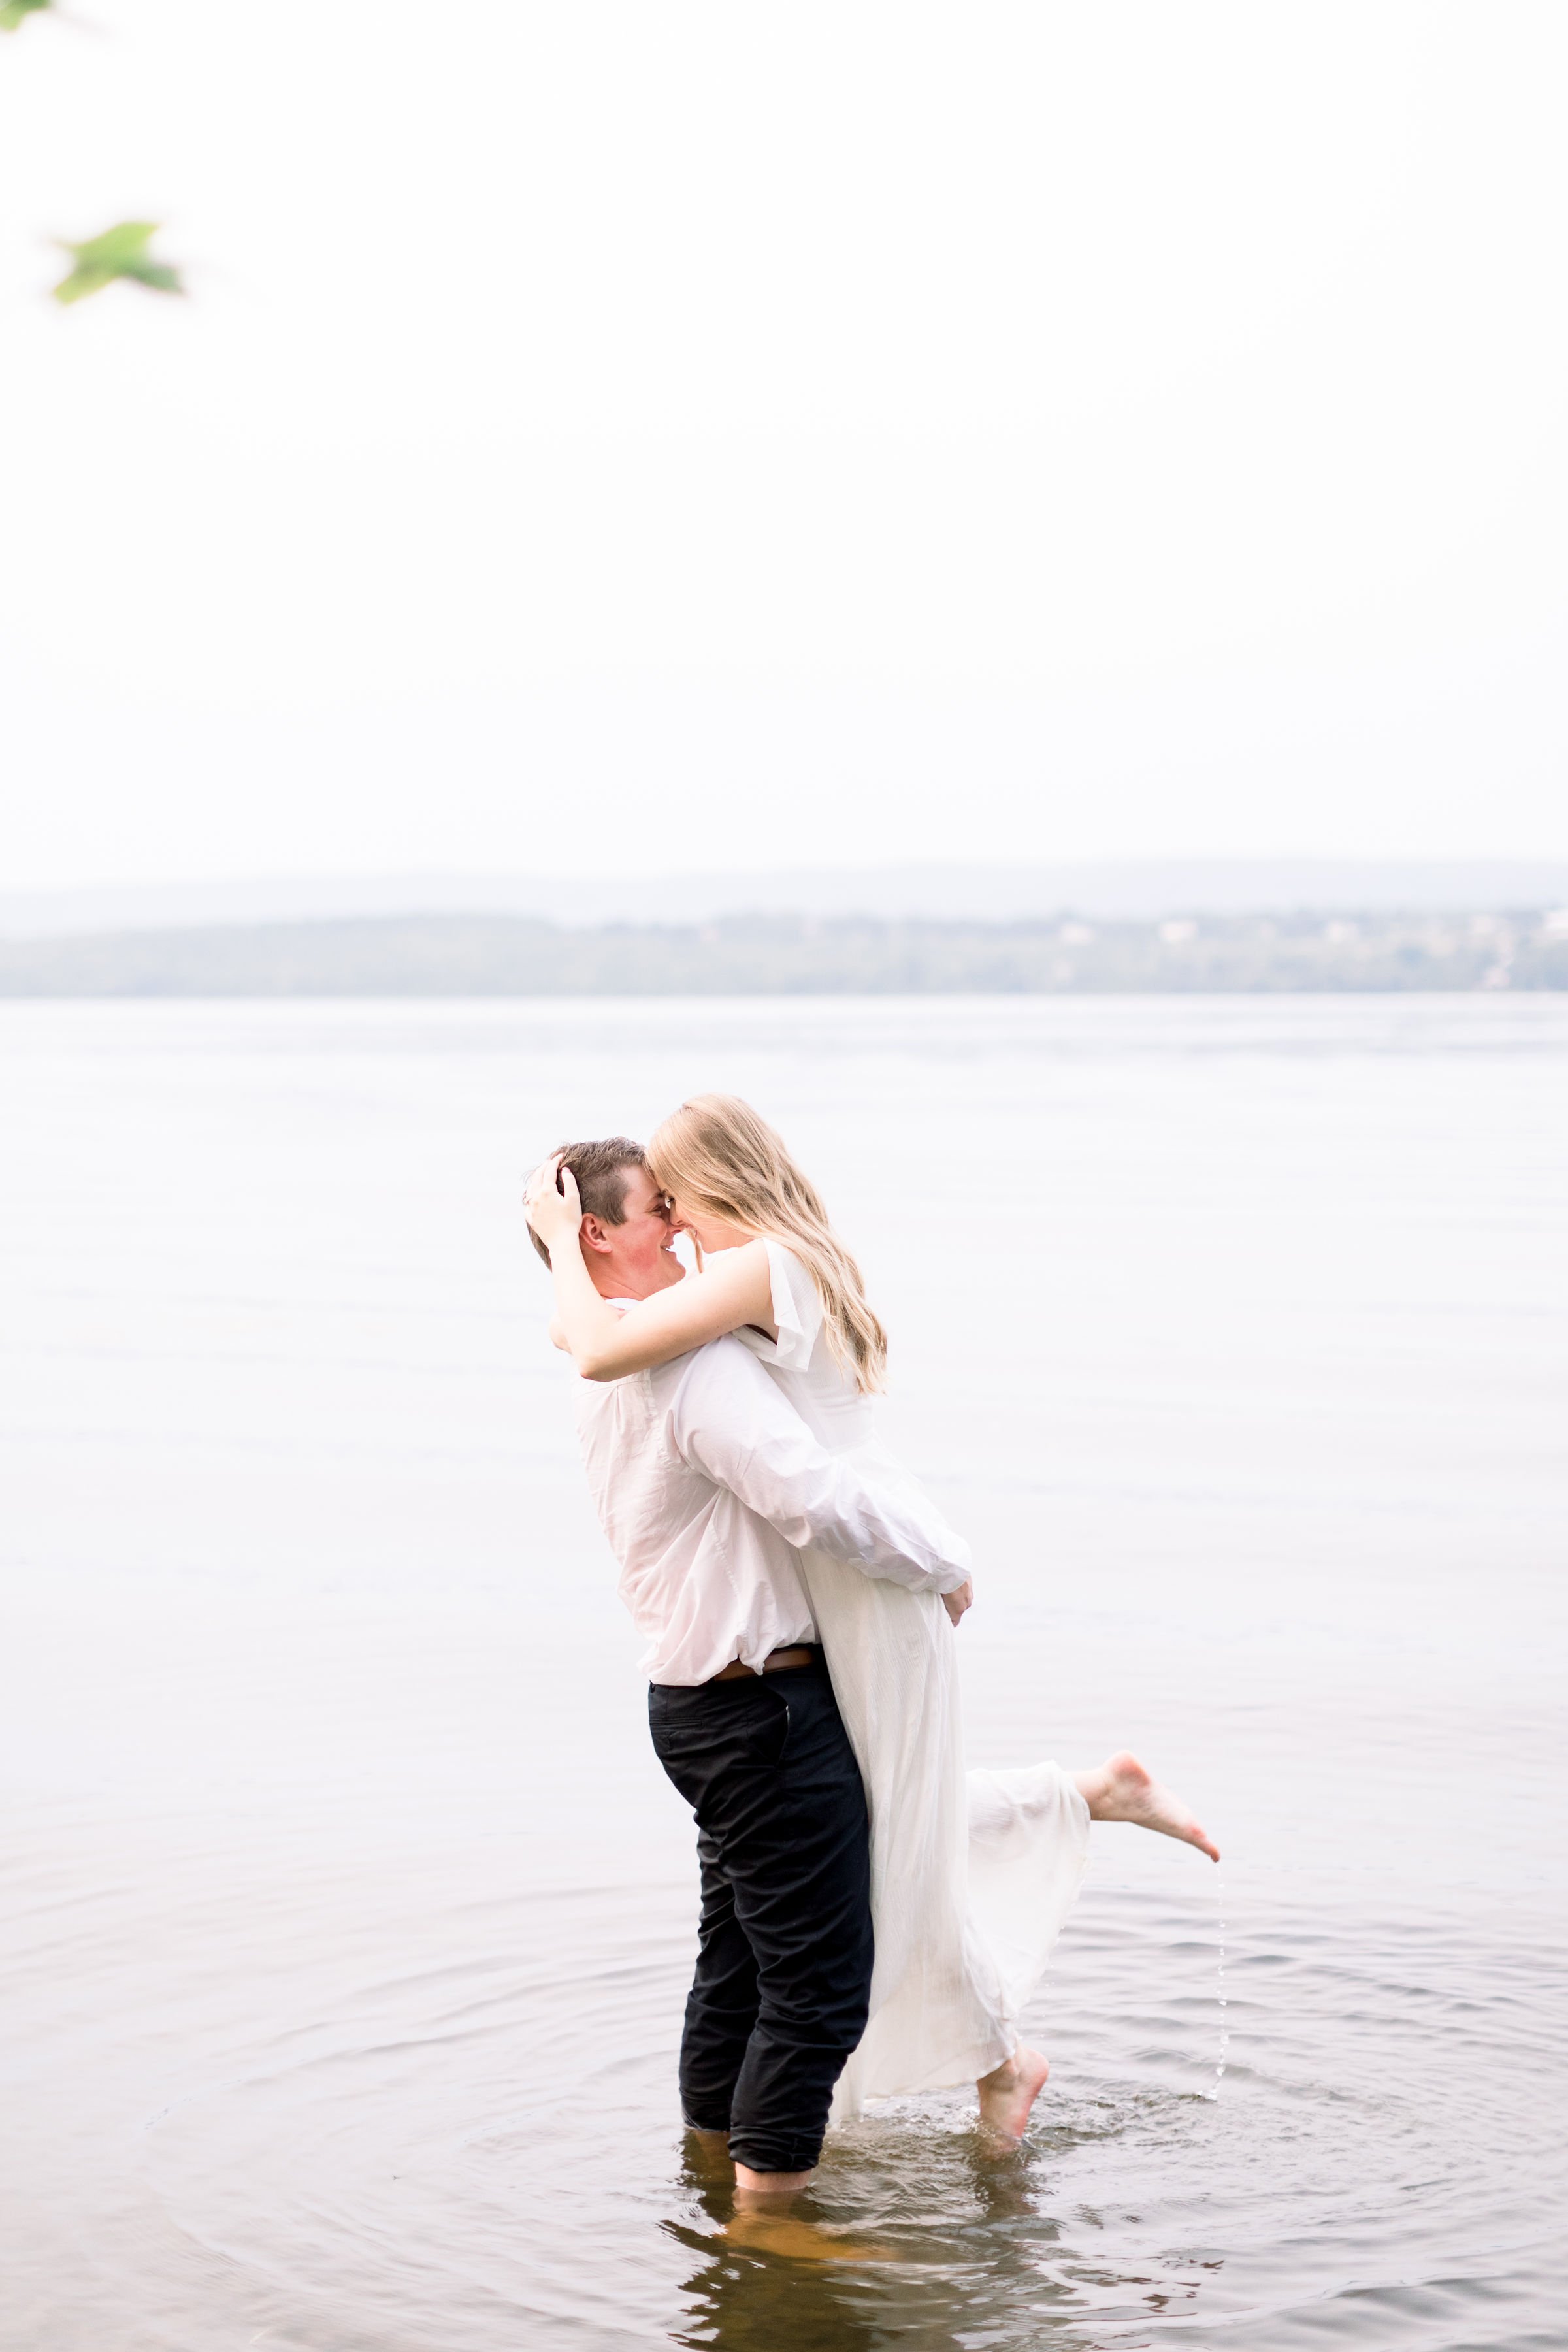  Man and woman hold each other tightly while standing in a lake by Chelsea Mason Photography. Ottawa professional photographers bare feet #ChelseaMasonPhotography #ChelseaMasonEngagements #PinheysPointEngagements #OttawaEngagementPhotography 